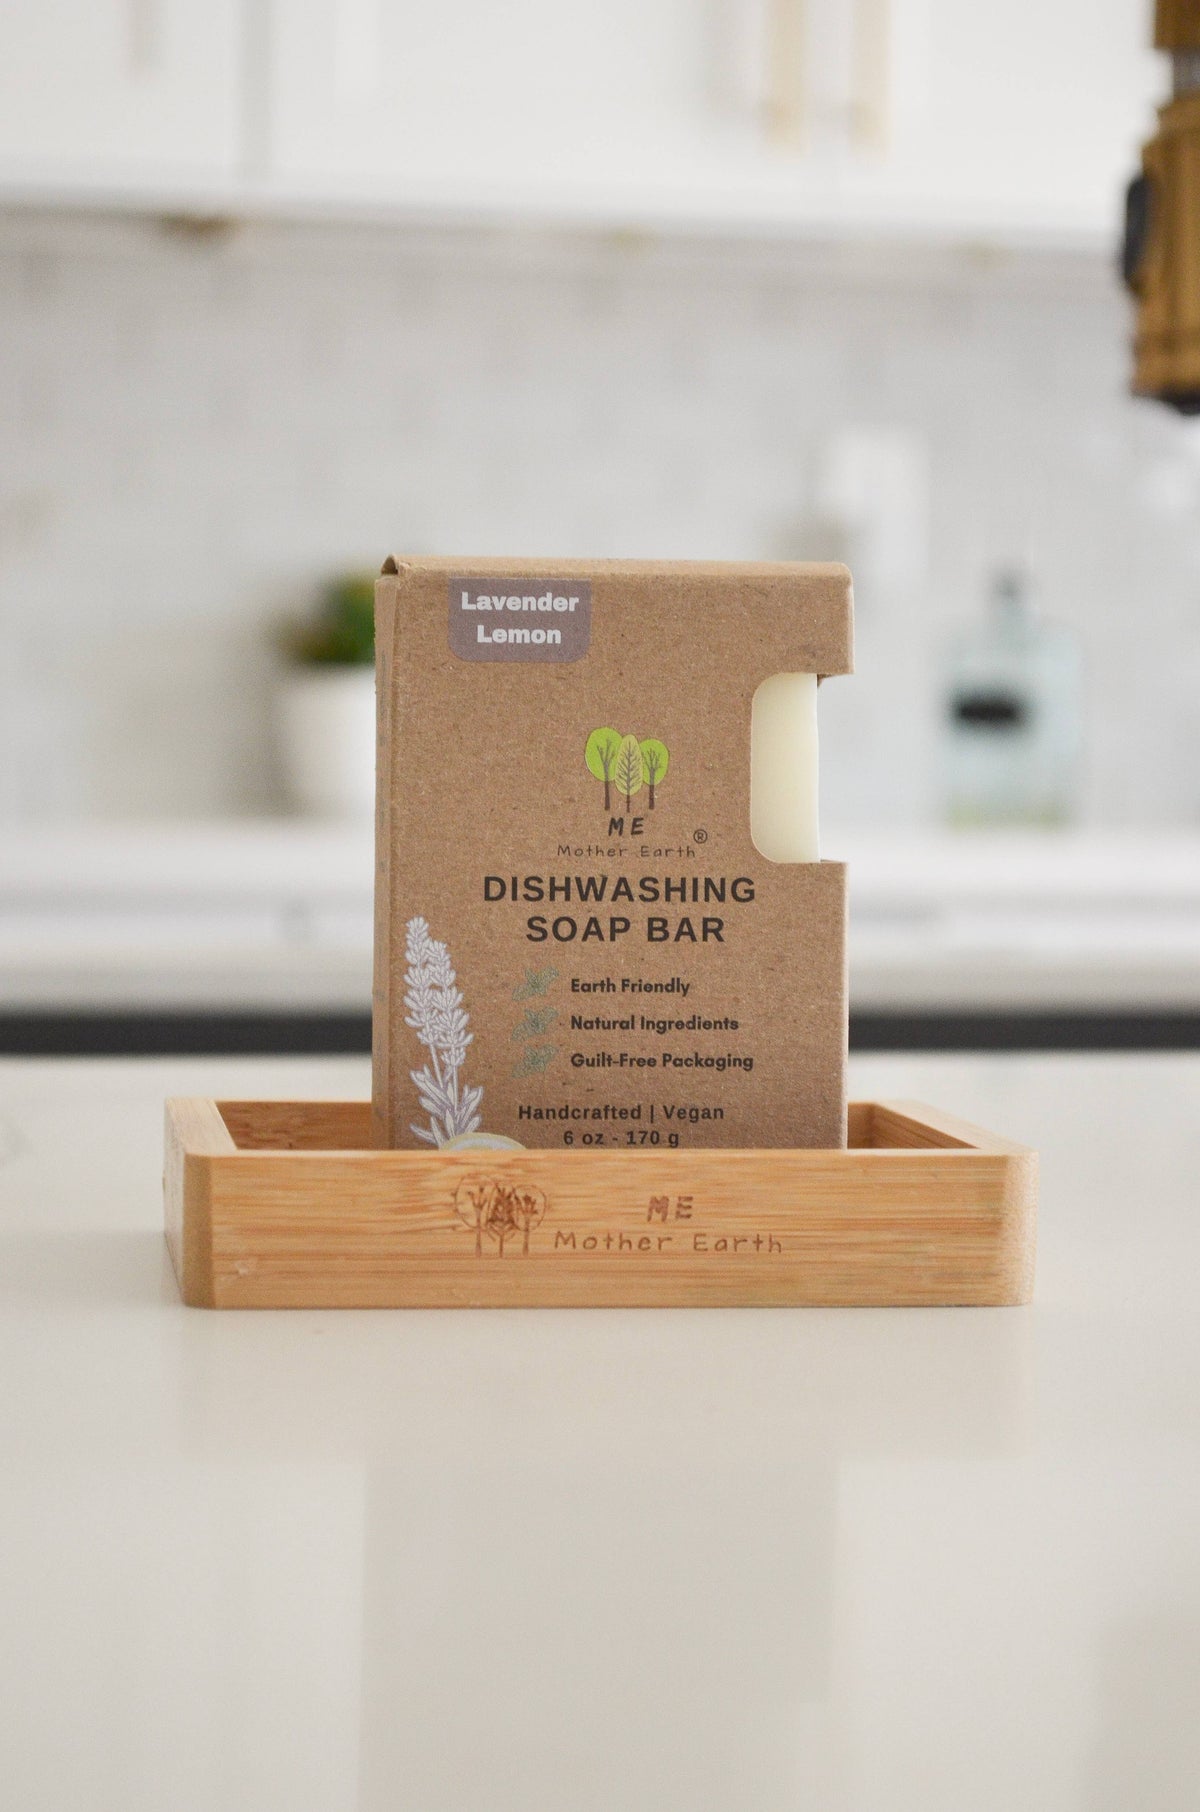 Me Mother Earth - Zero Waste Dishwashing Soap Bars: Unscented